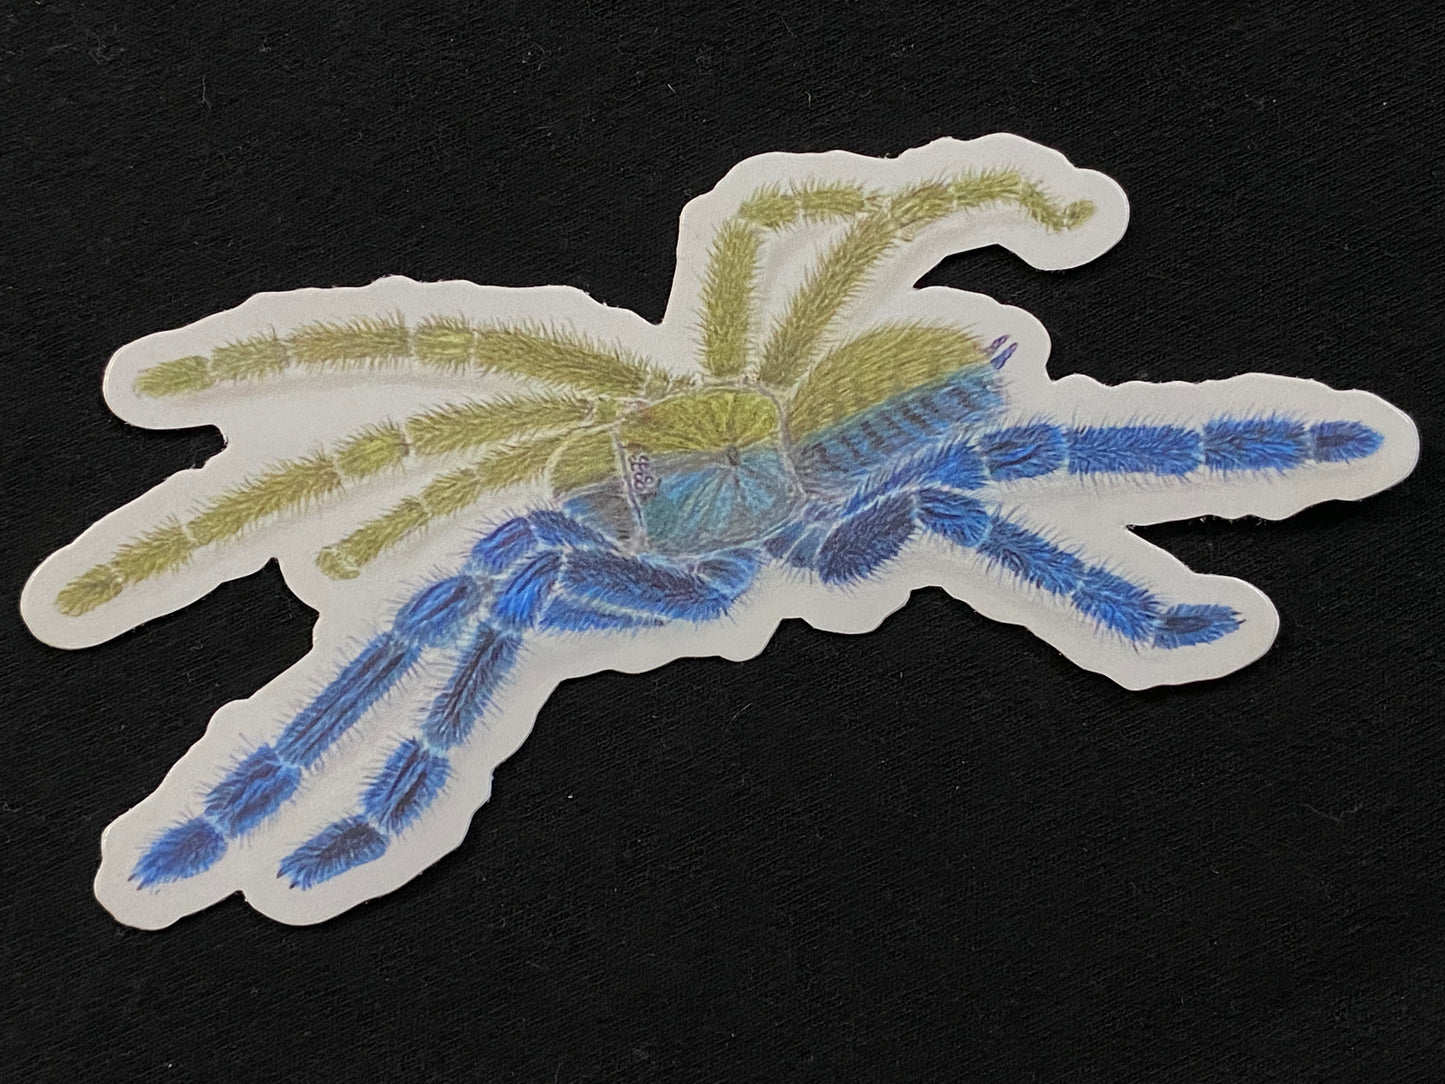 3” Vinyl stickers (O. violaceopes gynandromorph)